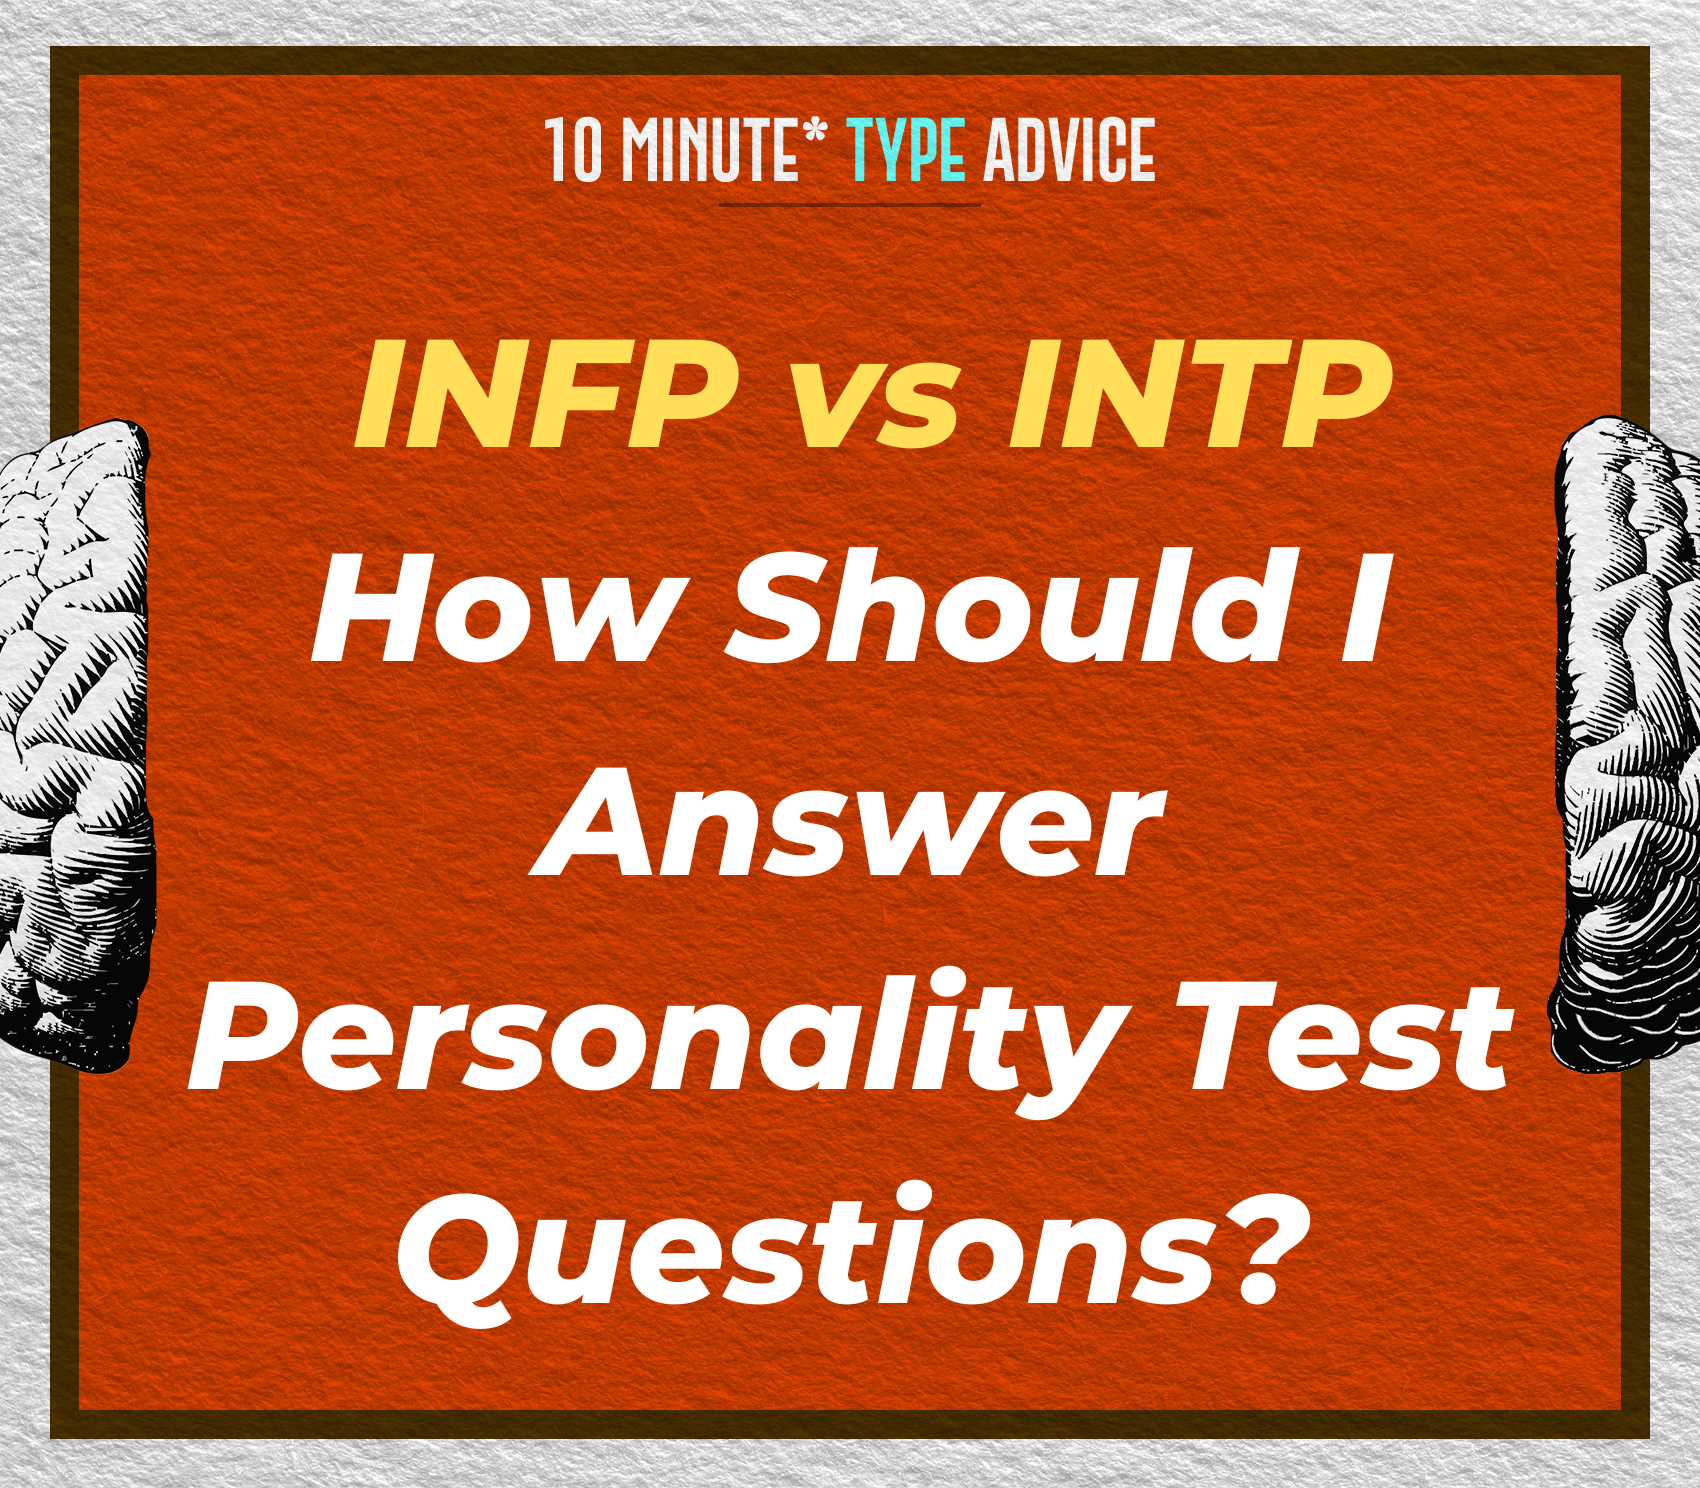 INFP vs INTP | How Should I Answer Personality Test Questions?  | 10 Min Type Advice | S03:03